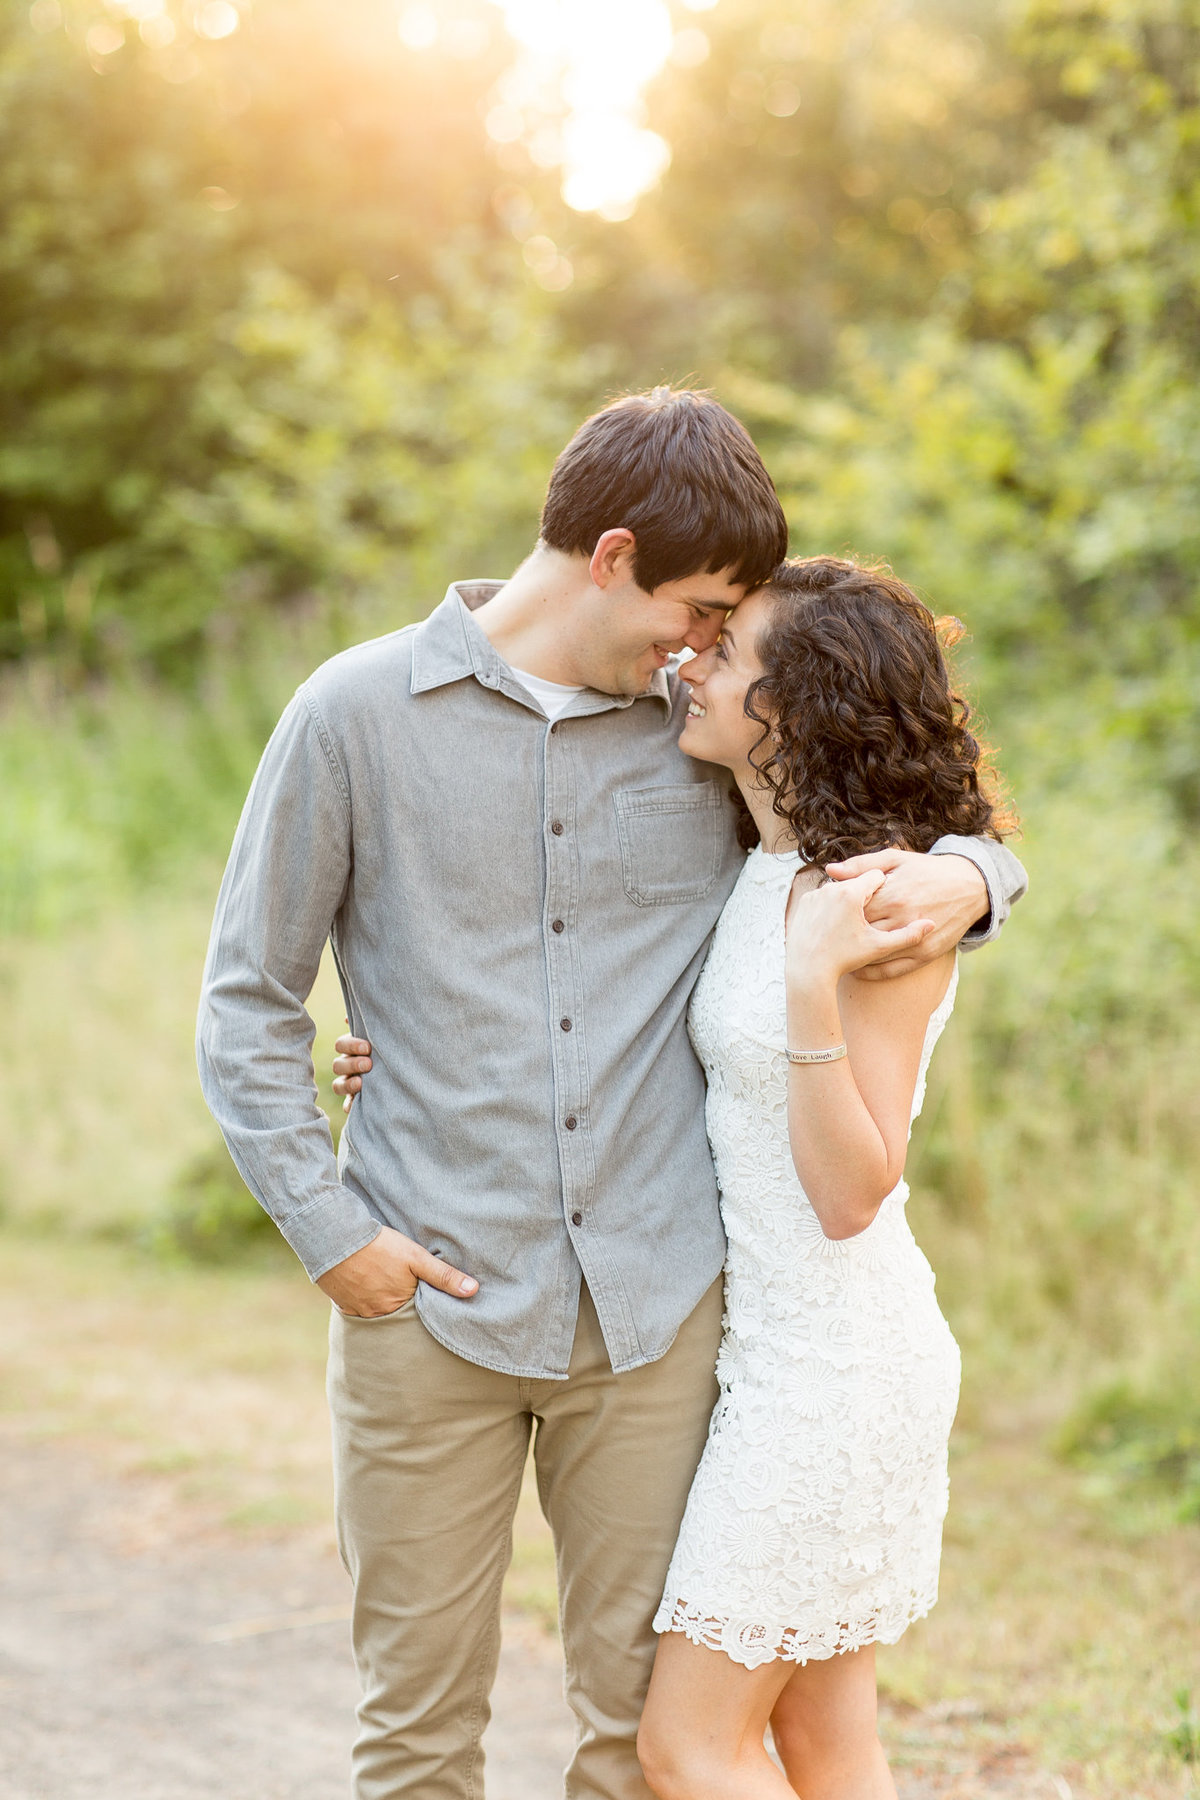 Blake & Annie | Previews | Emily Moller Photography (5 of 5)